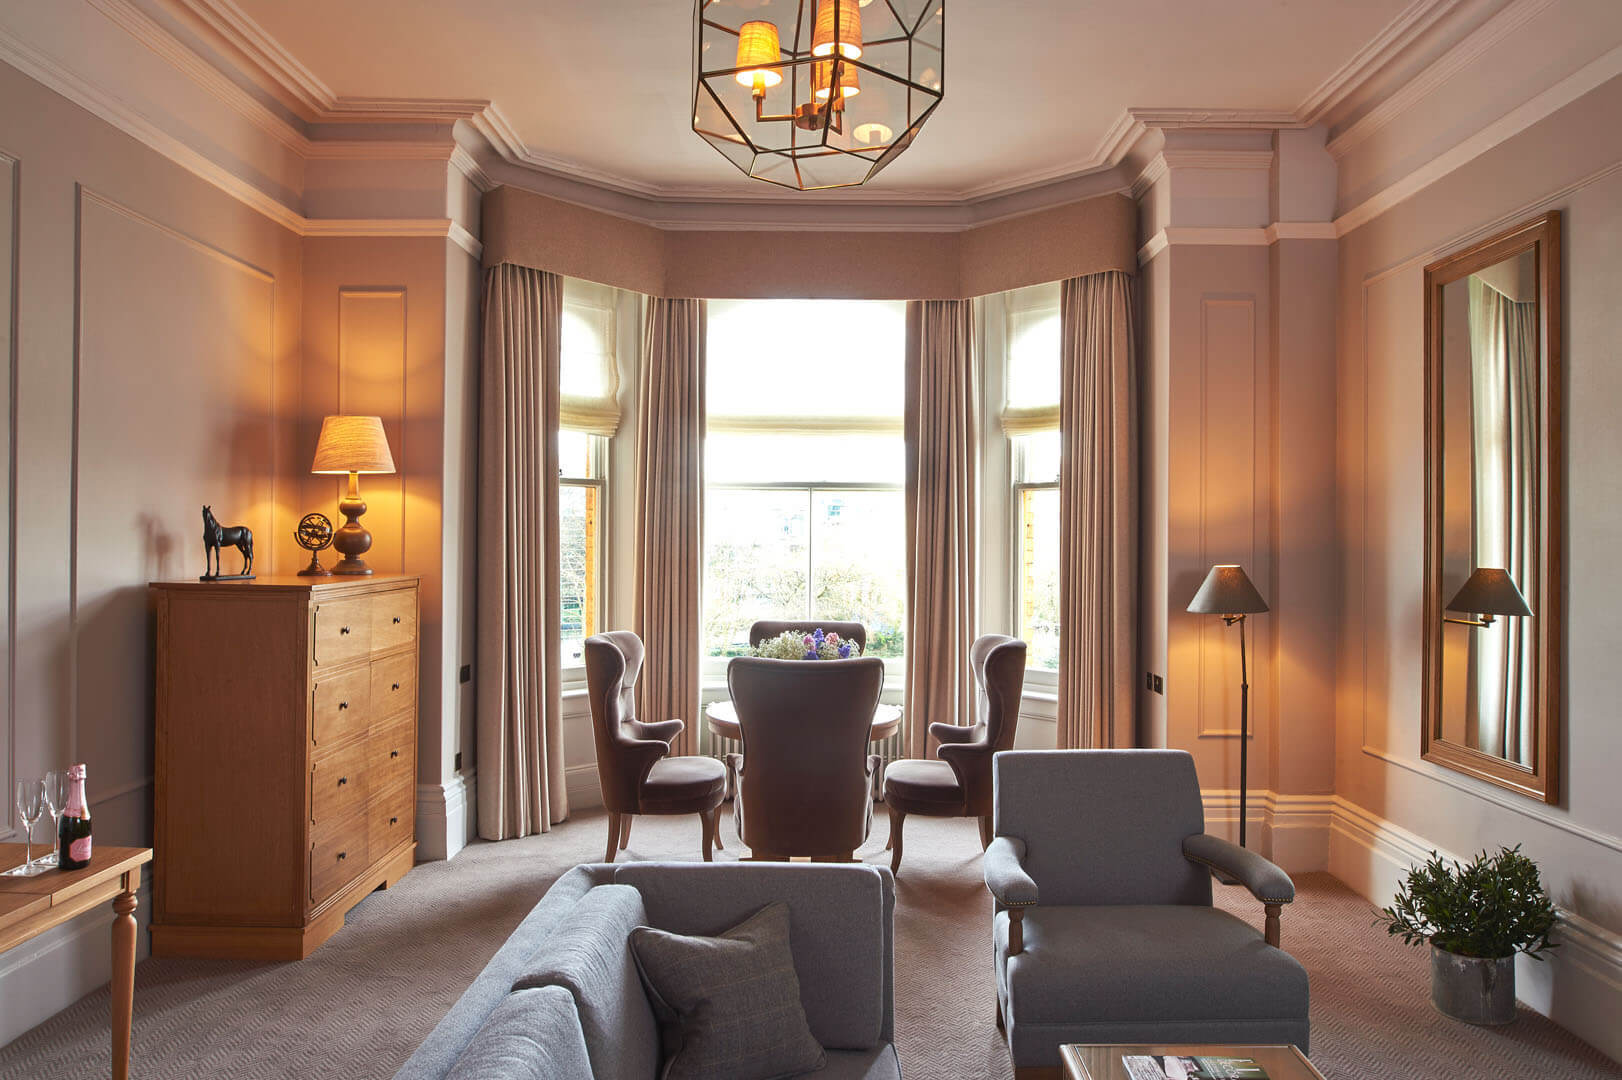 Interior style by the London designers Goddard Littlefair as seen in the Principal Hotel in York, England. Photograph: Pat Hansen